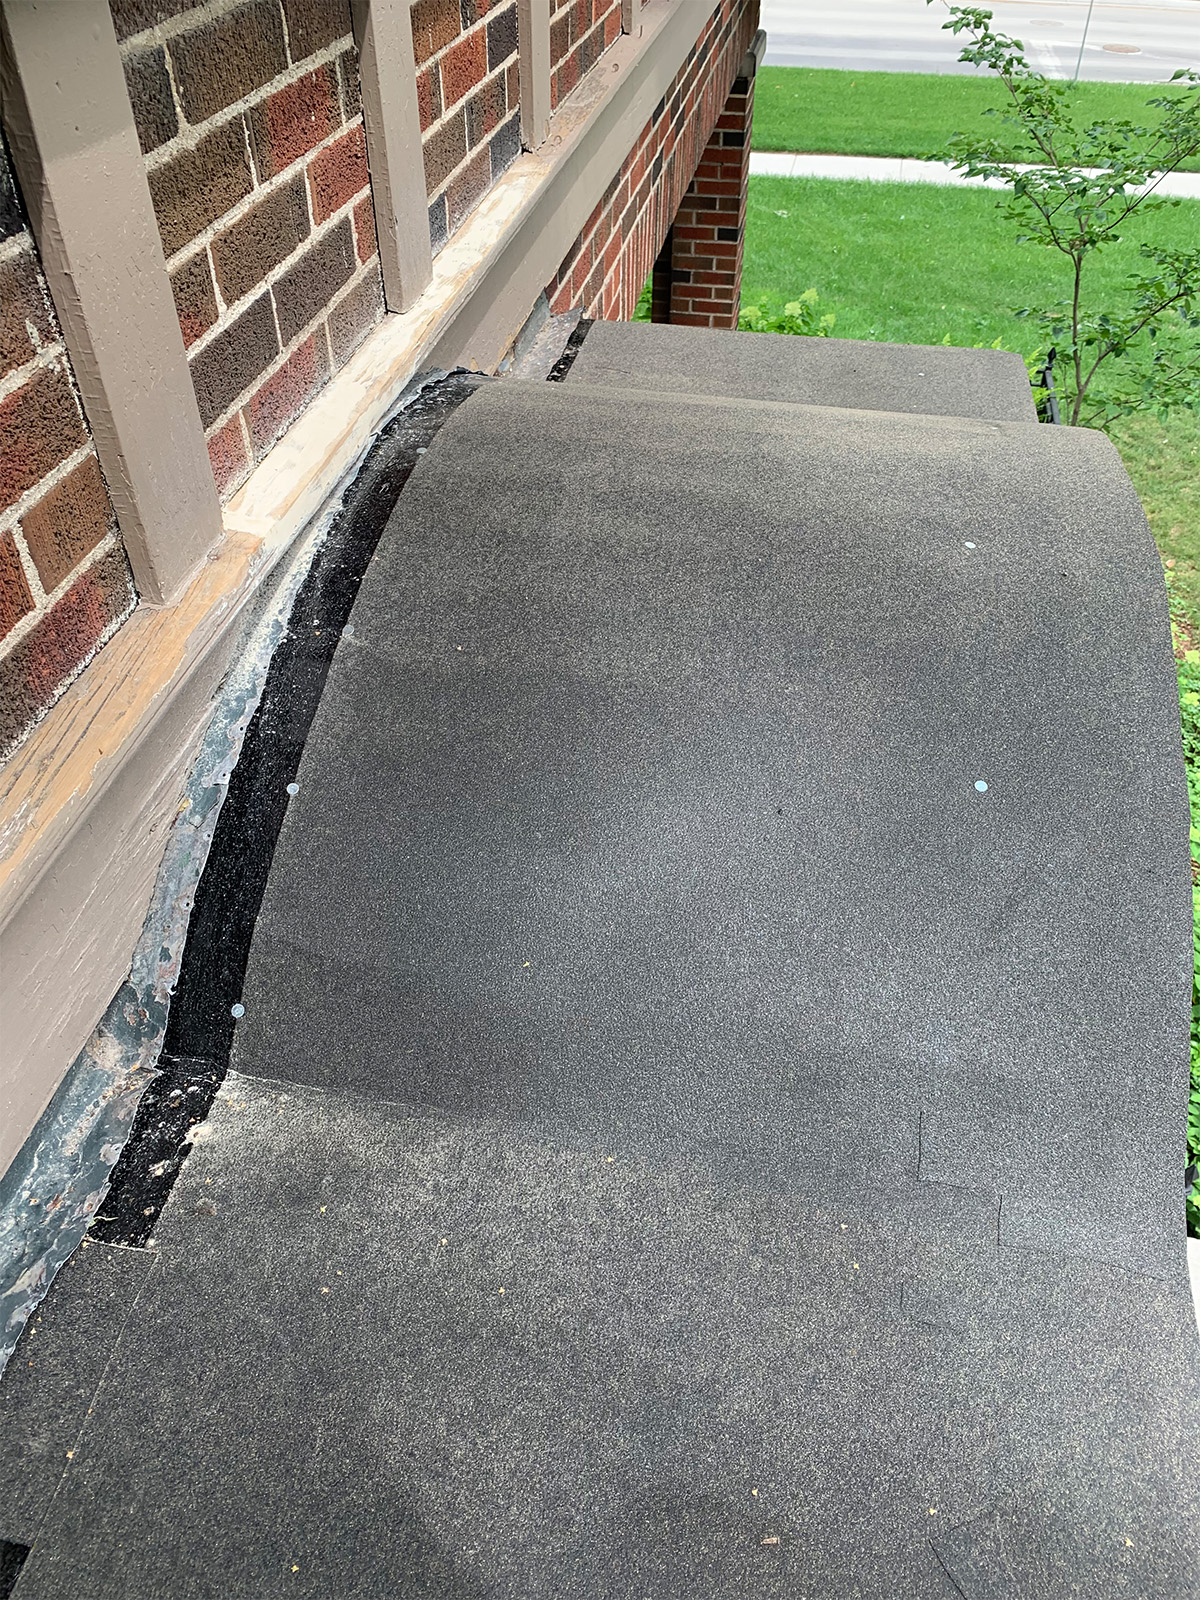 Victorian Home Roof After Repair